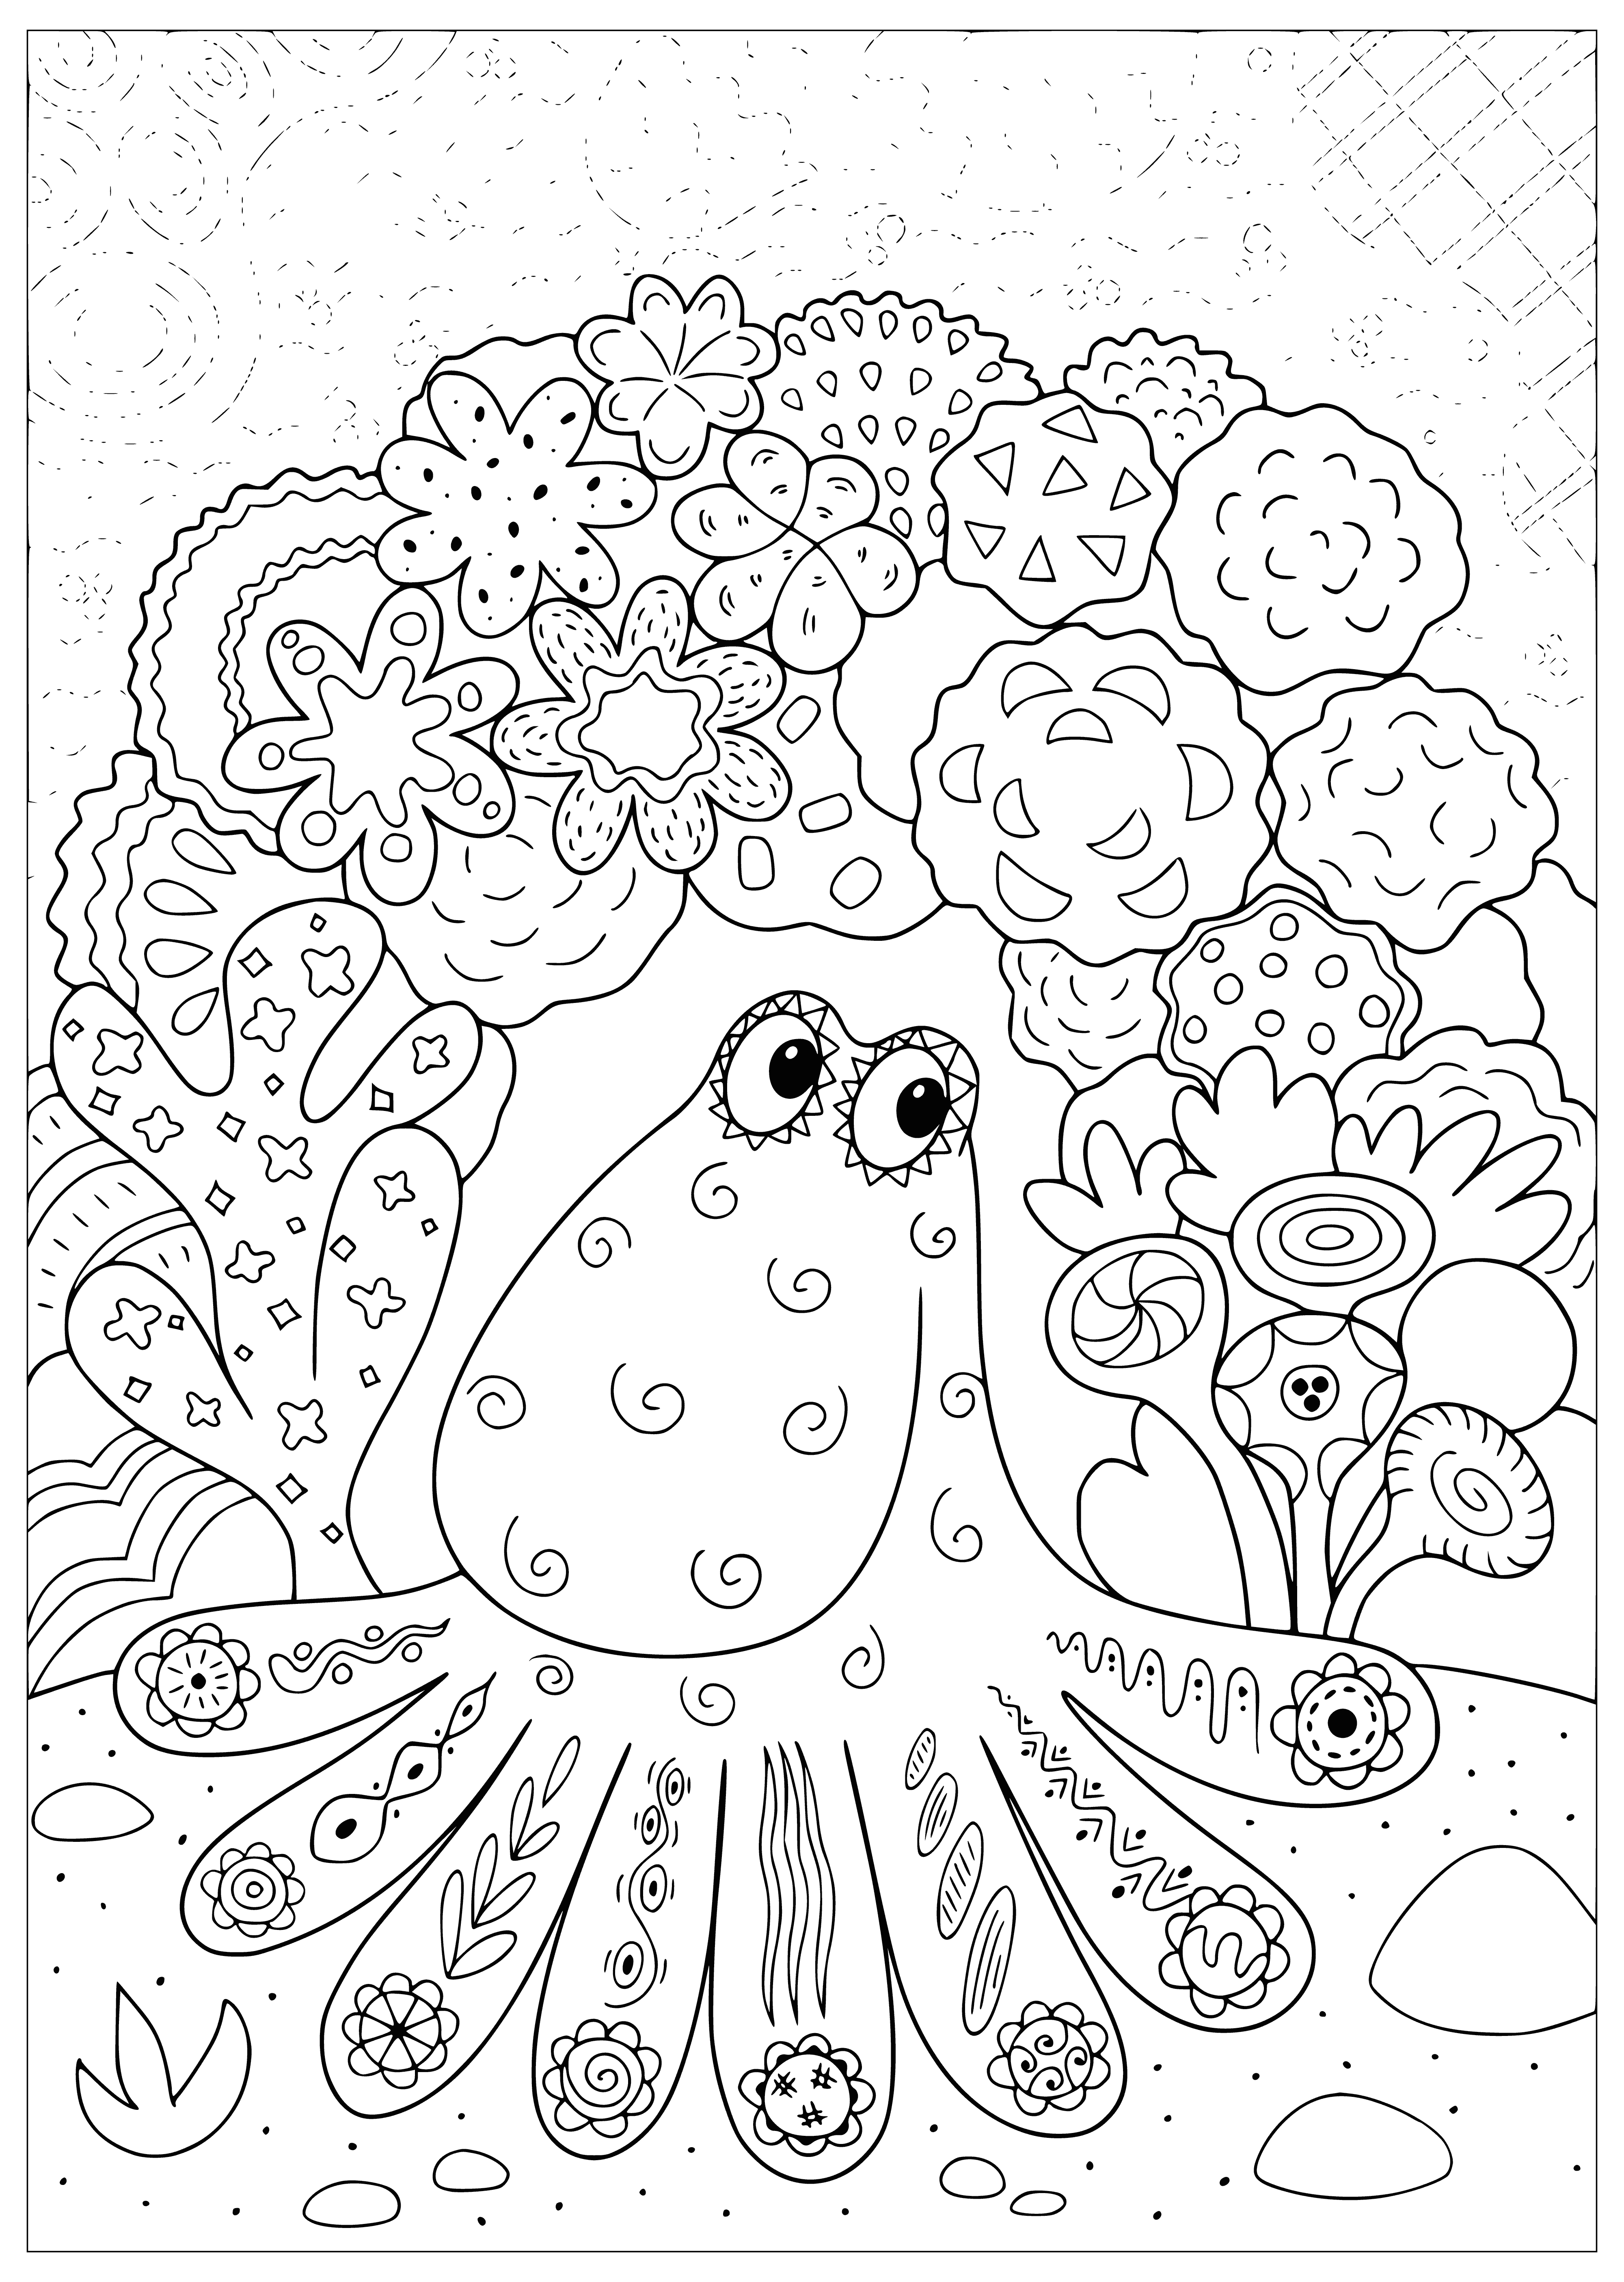 coloring page: Adults-only coloring book page: Large octopus, fish, light blue body, deep black eyes. Background light blue-green with darker shading.